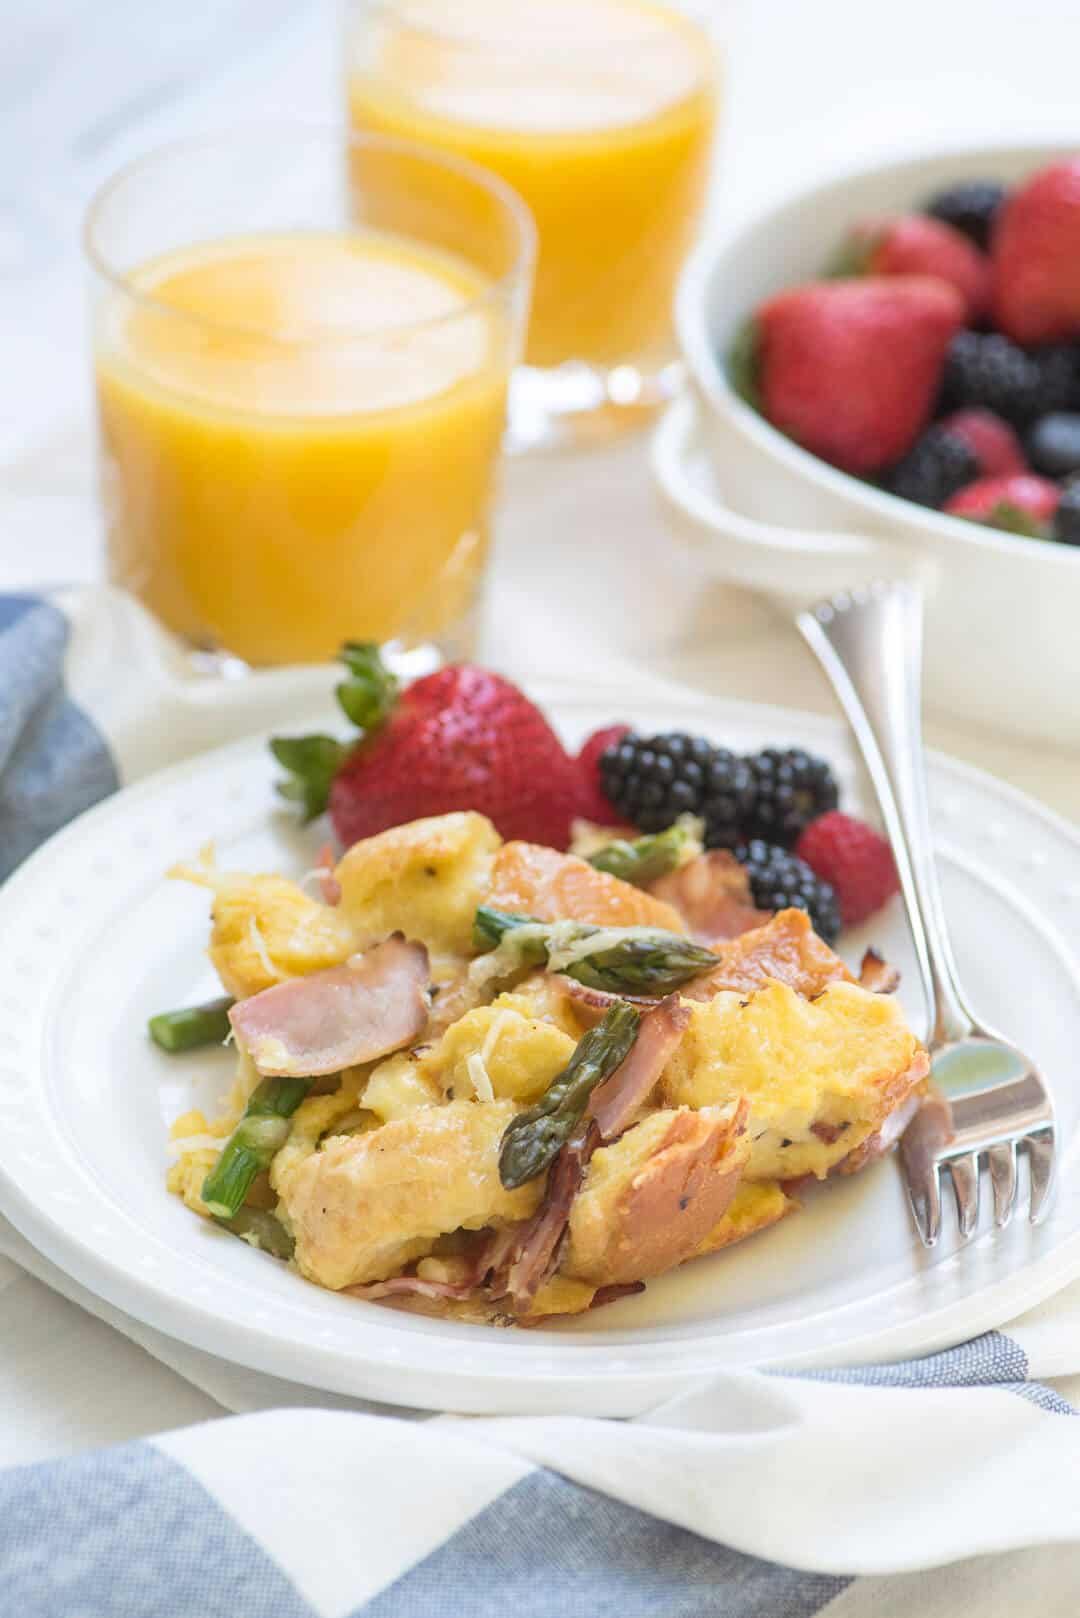  Savory French Toast Bake on a white serving plate with fresh berries and glasses of orange juice behind it.